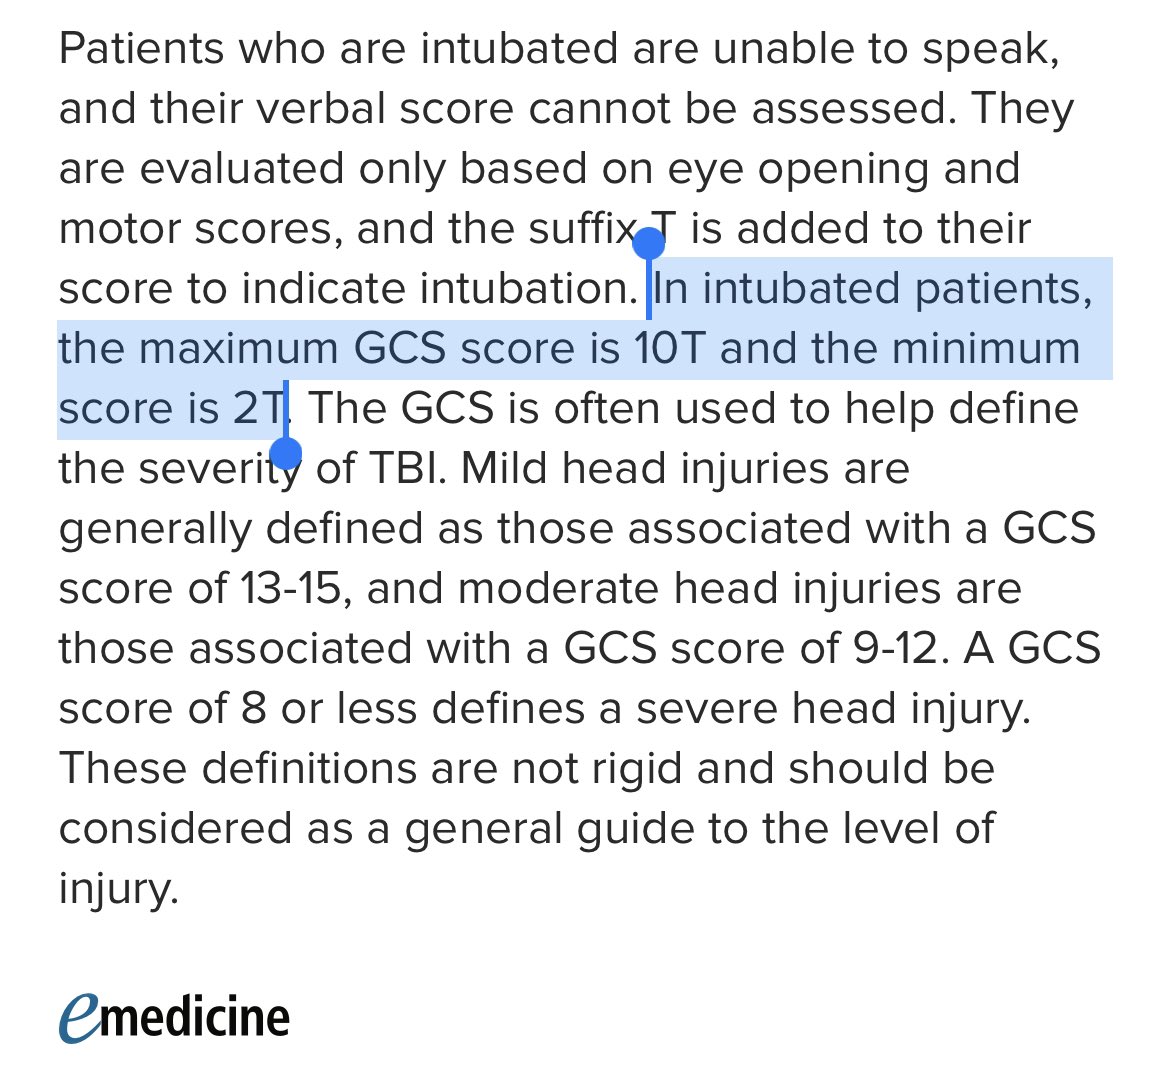 🚩 GCS 11T is not a thing (for intubated patients who score 4 for E and 6 for M) according to ACS-TQIP TBI guidelines i.e. t should be 10T 👀 #SoMe4Surgery #MedTwitter #MedEd #SoMe4Trauma